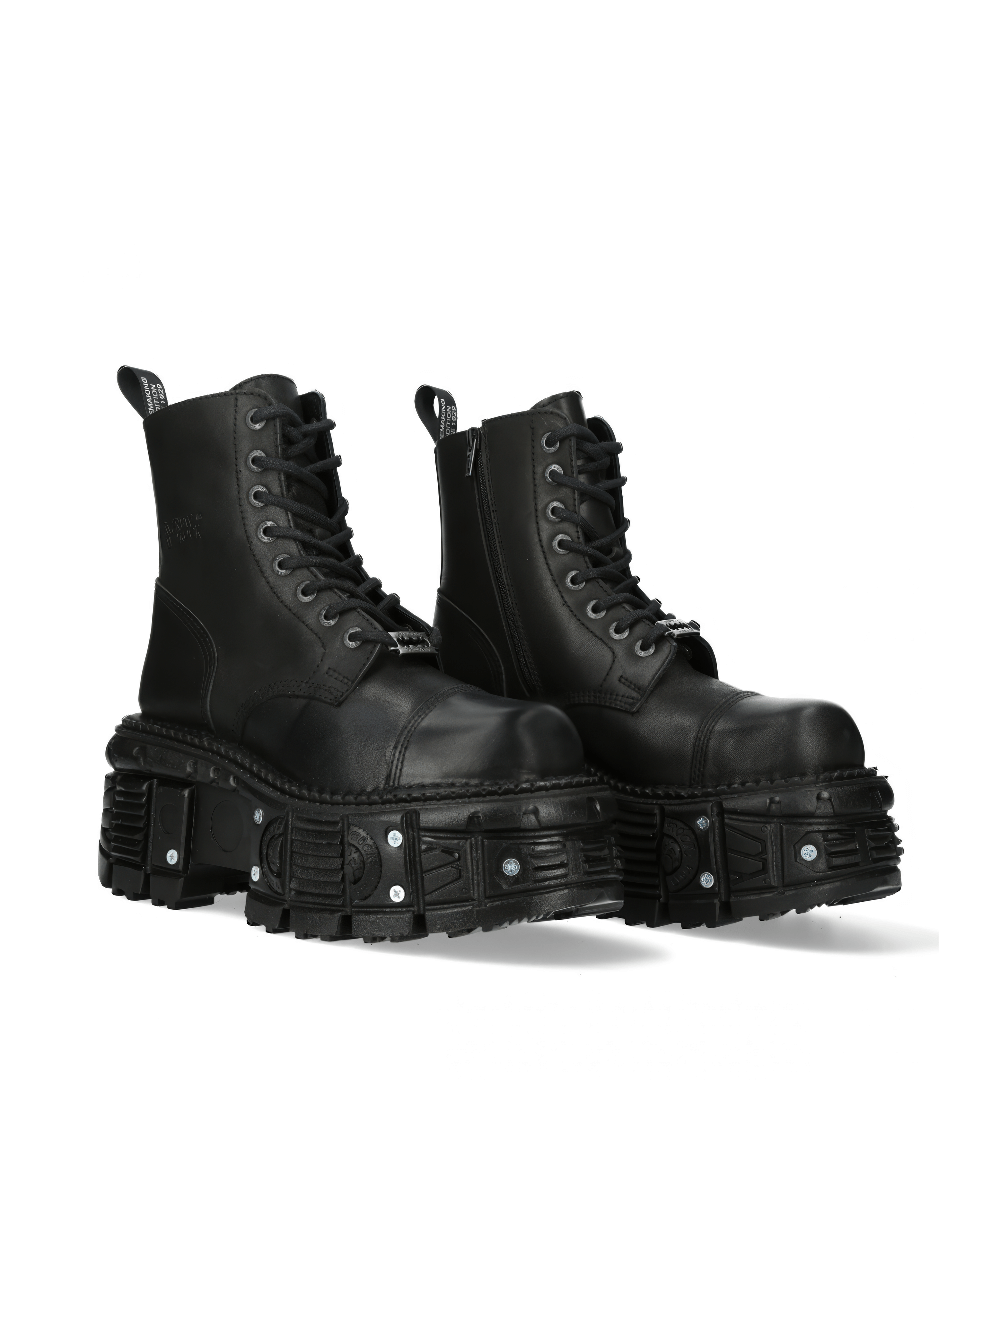 NEW ROCK Rugged Punk Style Ankle Boot with Stud Details